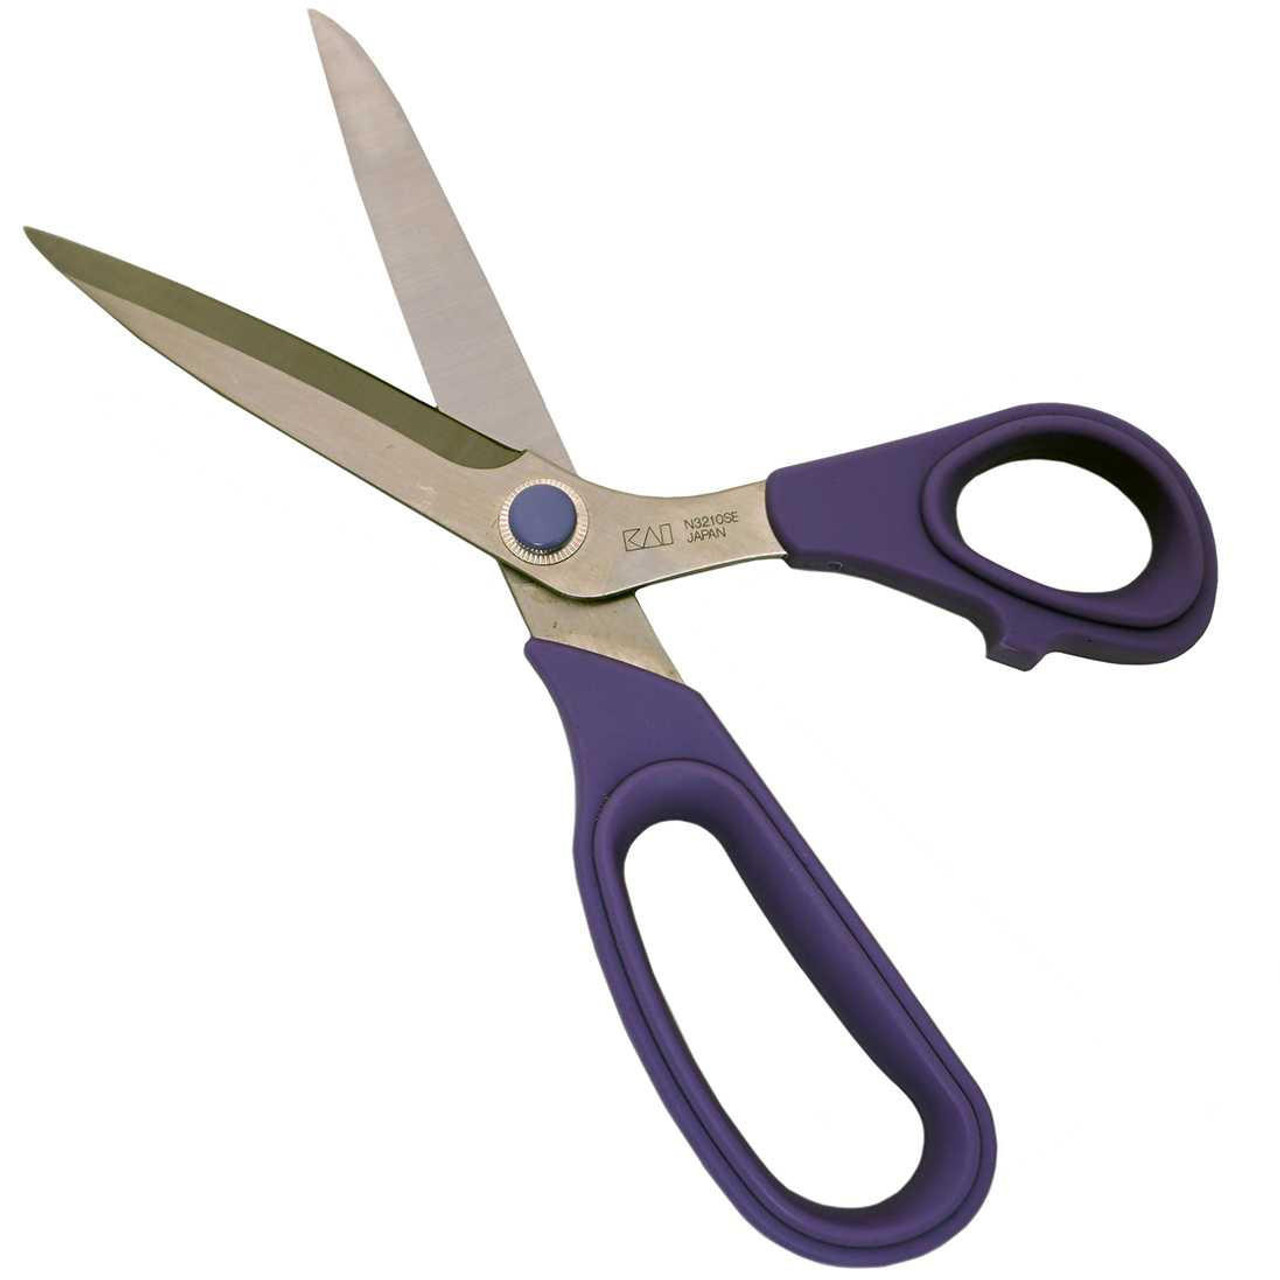 https://cdn11.bigcommerce.com/s-b8620/images/stencil/1280x1280/products/17969/93971/kai-8in-micro-serrated-patchwork-scissors__65439.1688920595.jpg?c=2